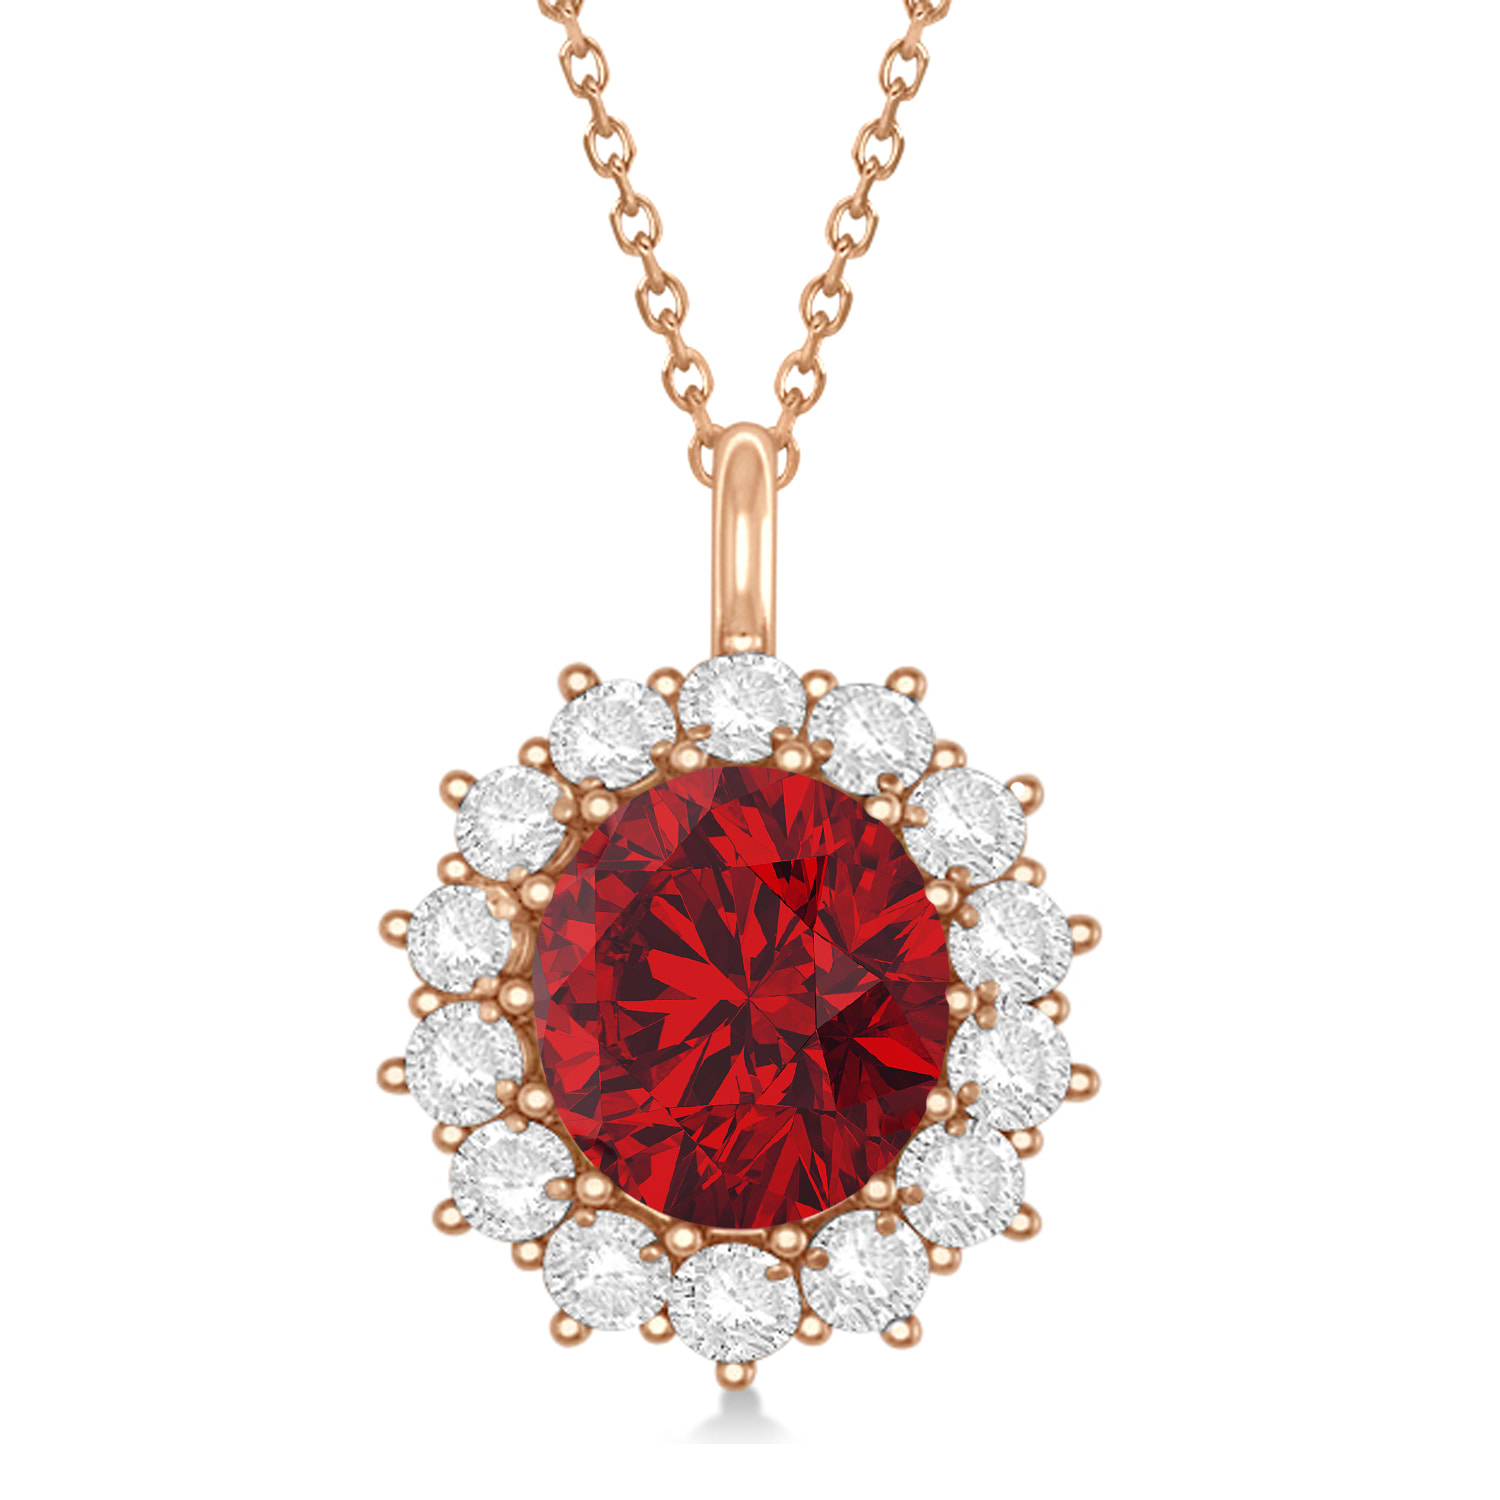 Oval Ruby and Diamond Pendant Necklace 18K Rose Gold (5.40ctw)